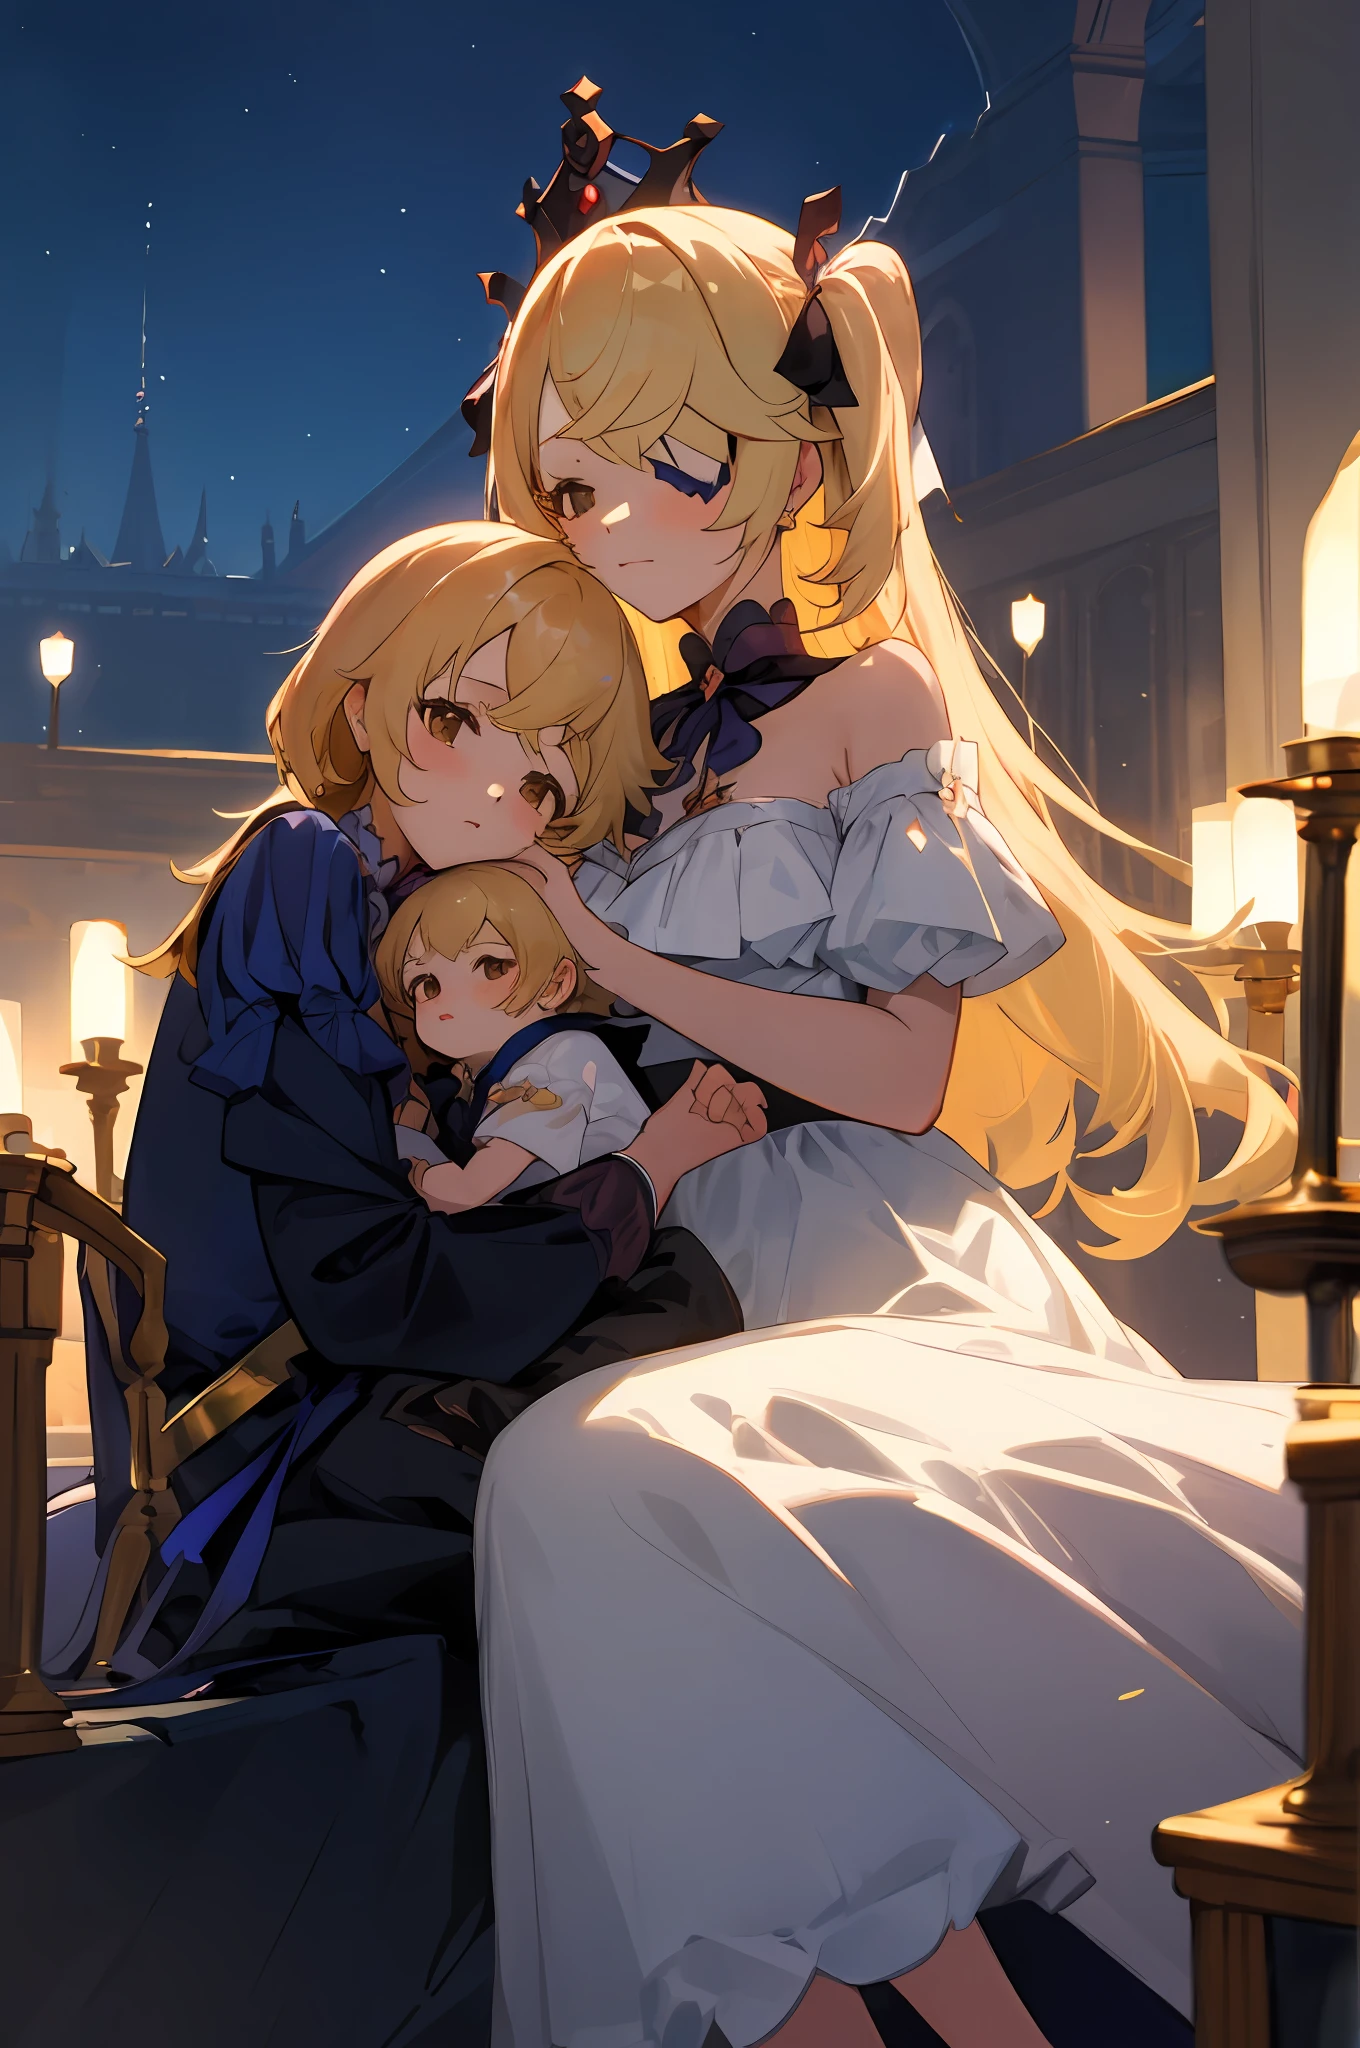 anime image of two women dressed in dress posing for a picture like princess clothing in summer, beautiful decoration on dress, palace a girl in palace, long hair, yellow haired , anime fantasy illustration, from the azur lane videogame, genshin, Royal Princess detailed art, two beautiful anime girls, mother and child, symbol of maternal love, mother and child, such as photos of mother and child, Embarrassed, royal castle, sitting in the palace, night, fireworks